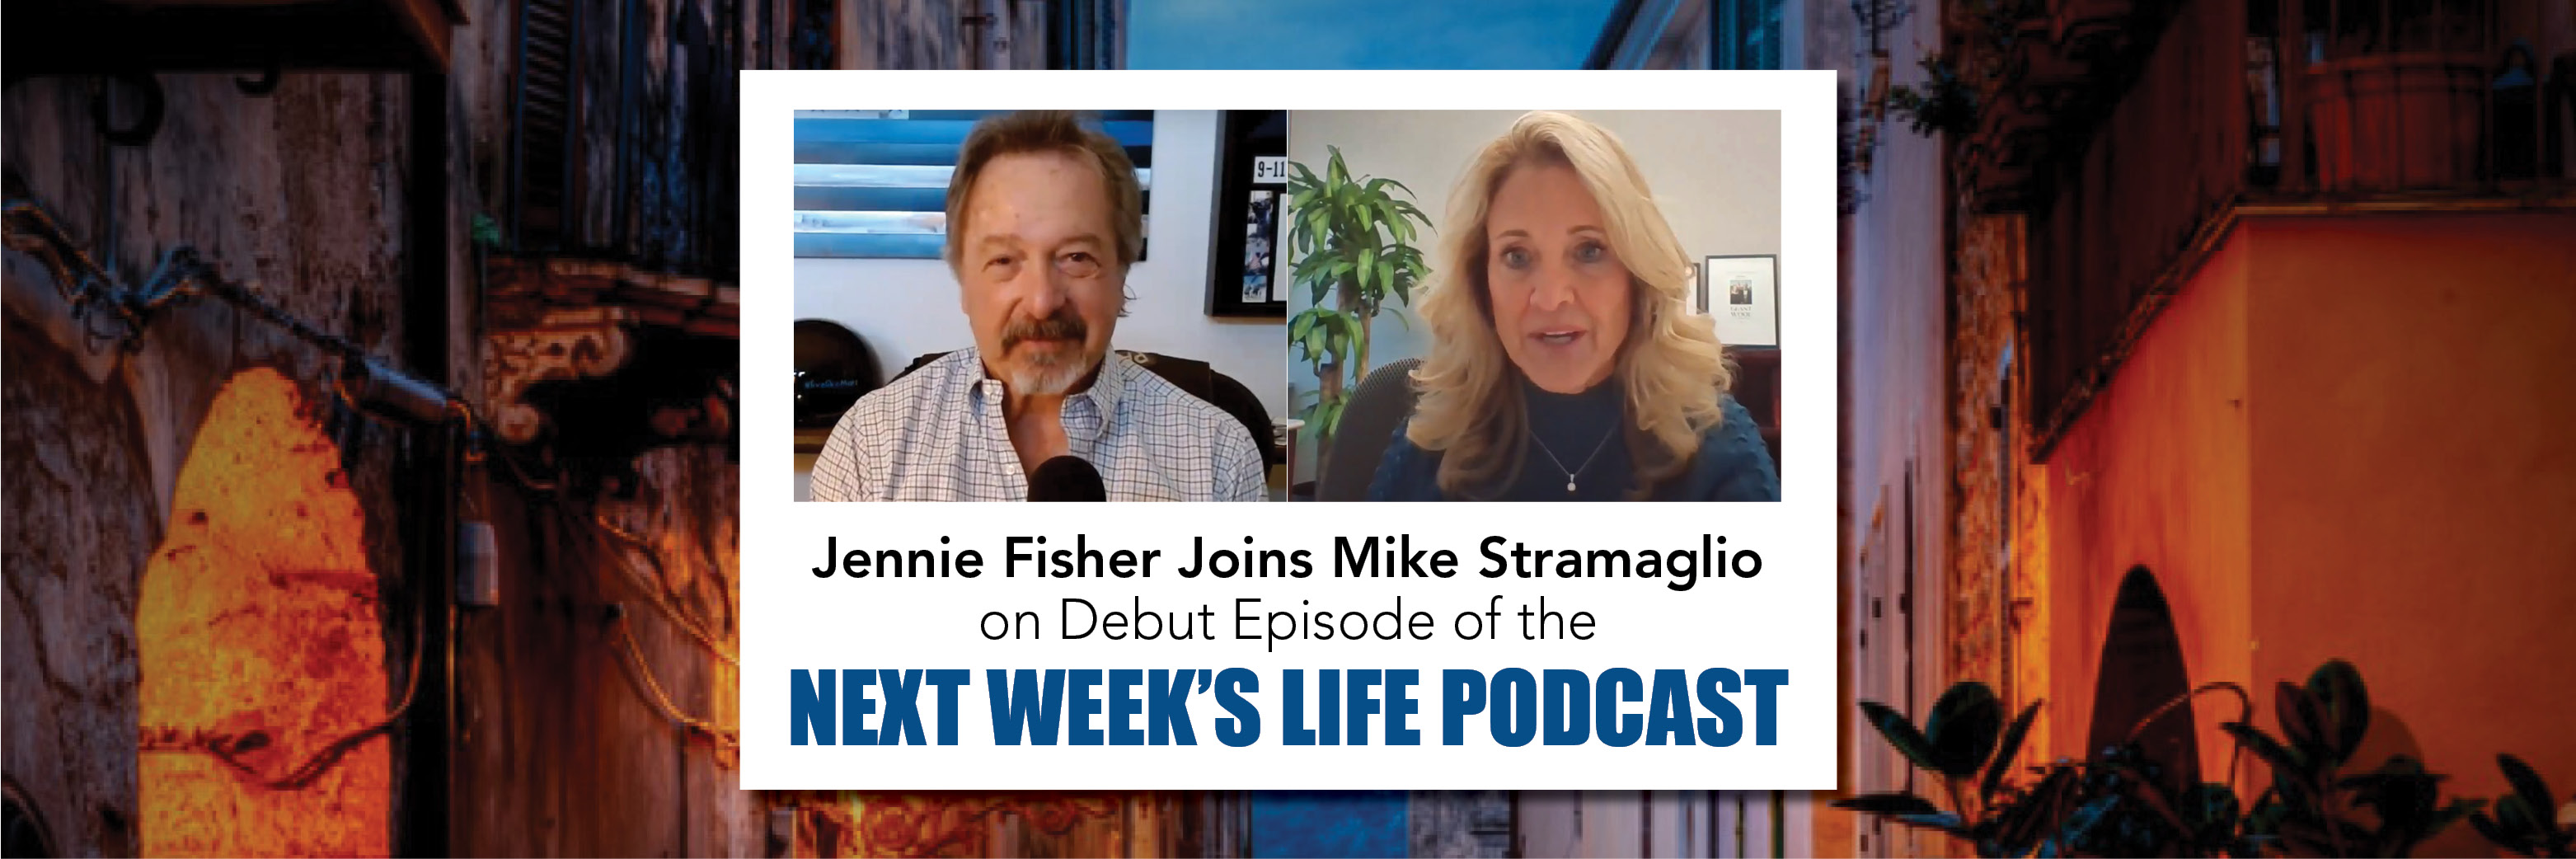 Jennie Fisher Joins Mike Stramaglio on Debut Episode of the Next Week’s Life Podcast